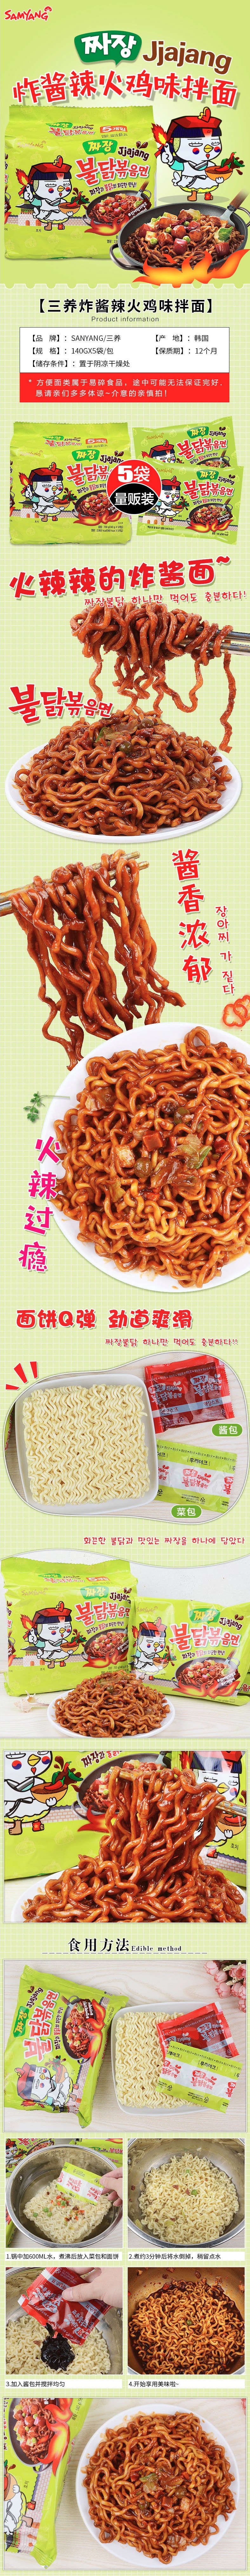 Hot Chicken Noodles Soy Bean Paste140g*5